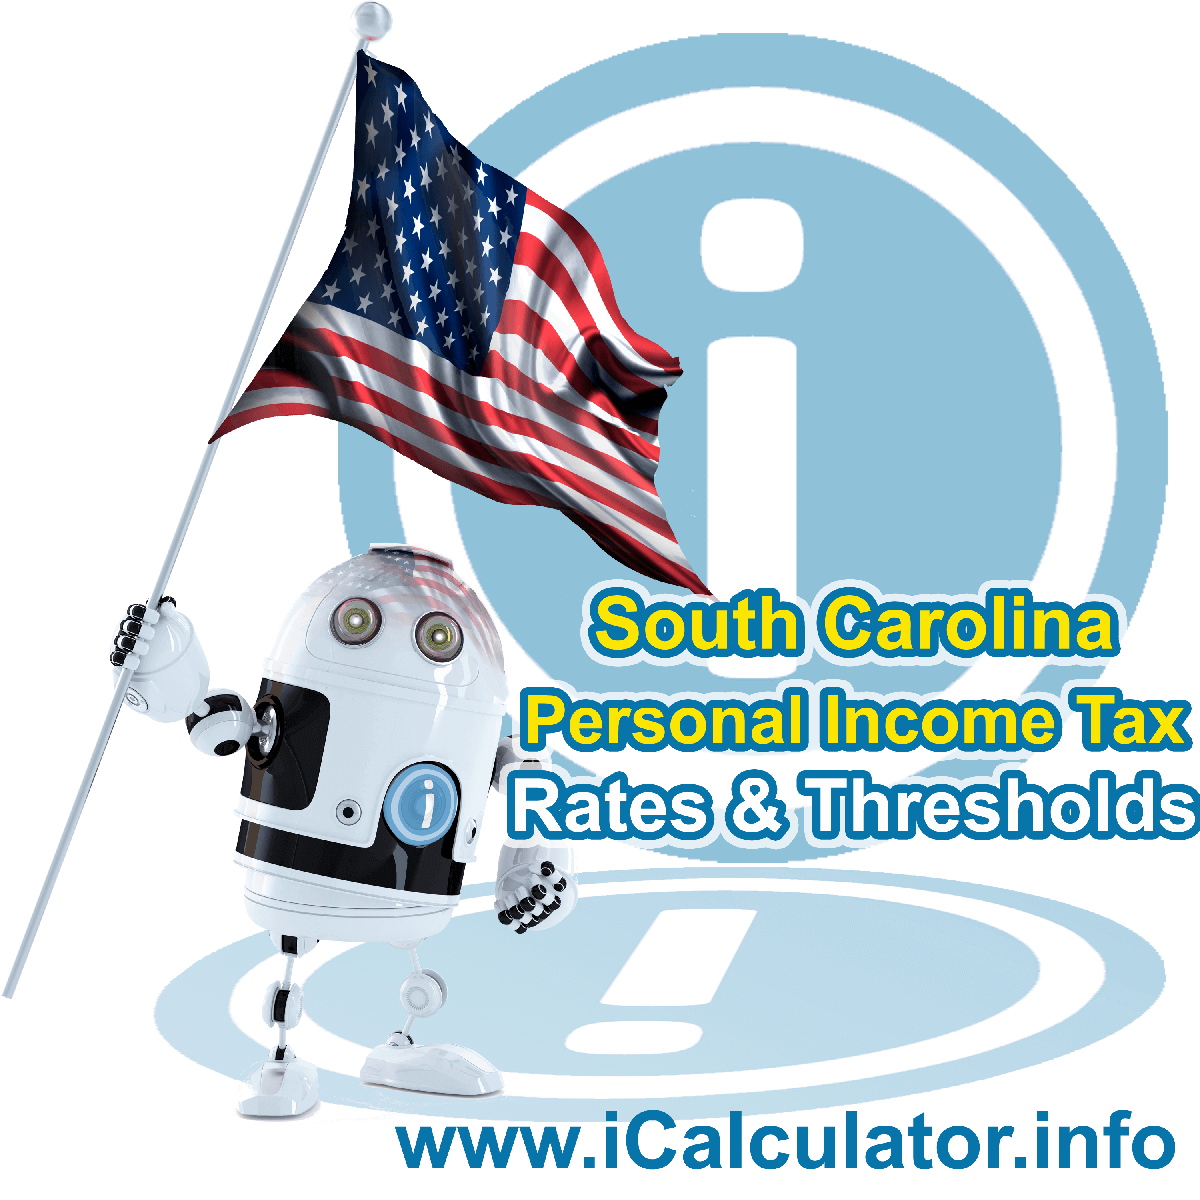 South Carolina State Tax Tables 2021. This image displays details of the South Carolina State Tax Tables for the 2021 tax return year which is provided in support of the 2021 US Tax Calculator